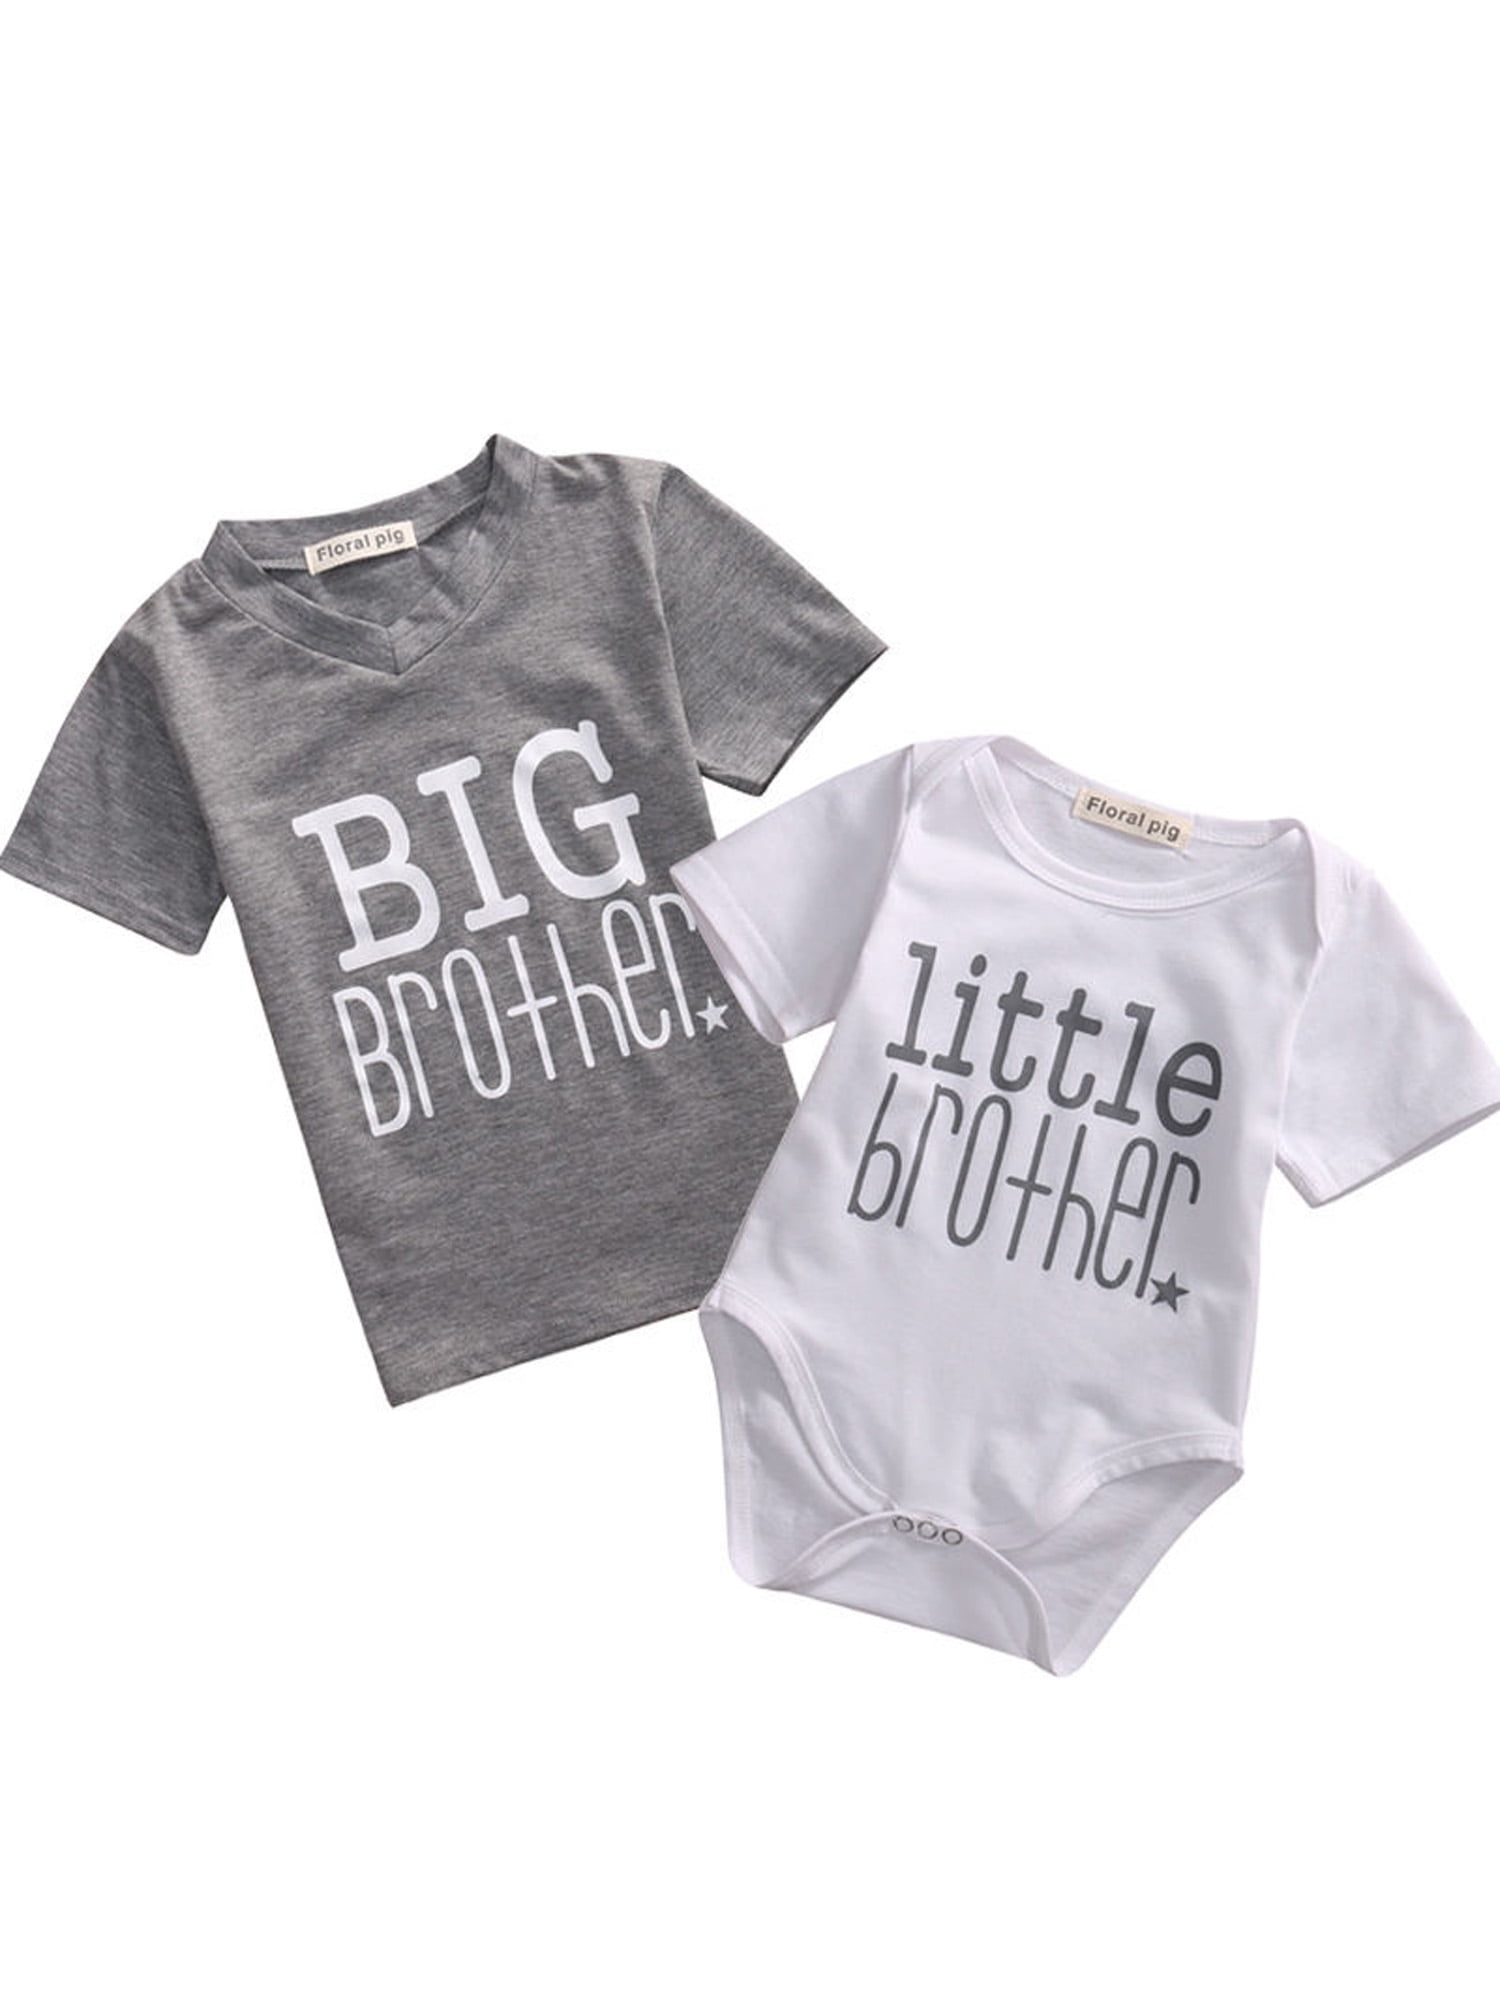 Family Matching Baby Boy Clothes Big Brother Little Brother Shirts ...